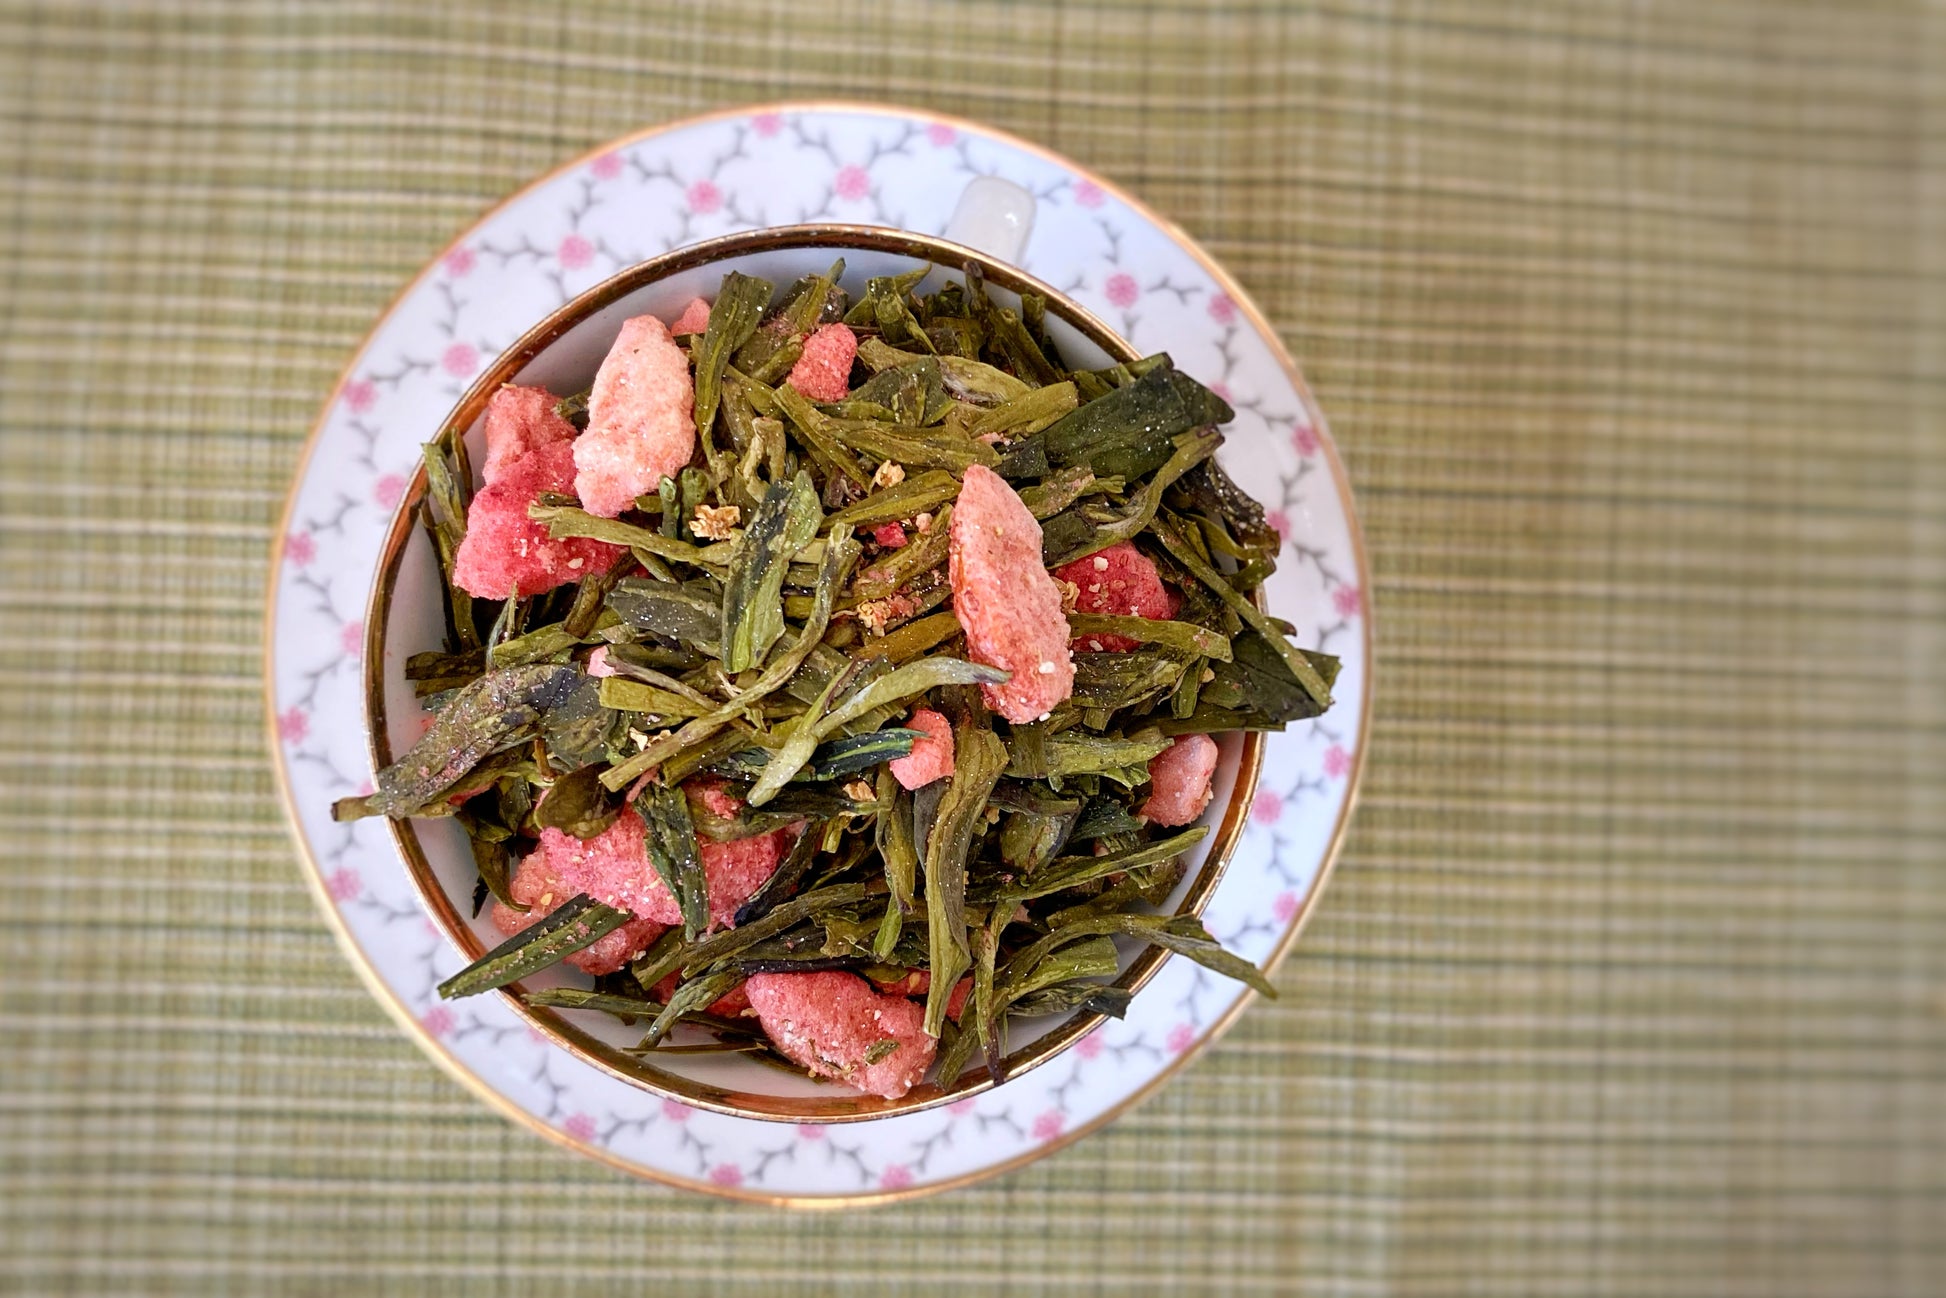 A pink and white teacup holds glitter-dusted green tea leaves and strawberries.